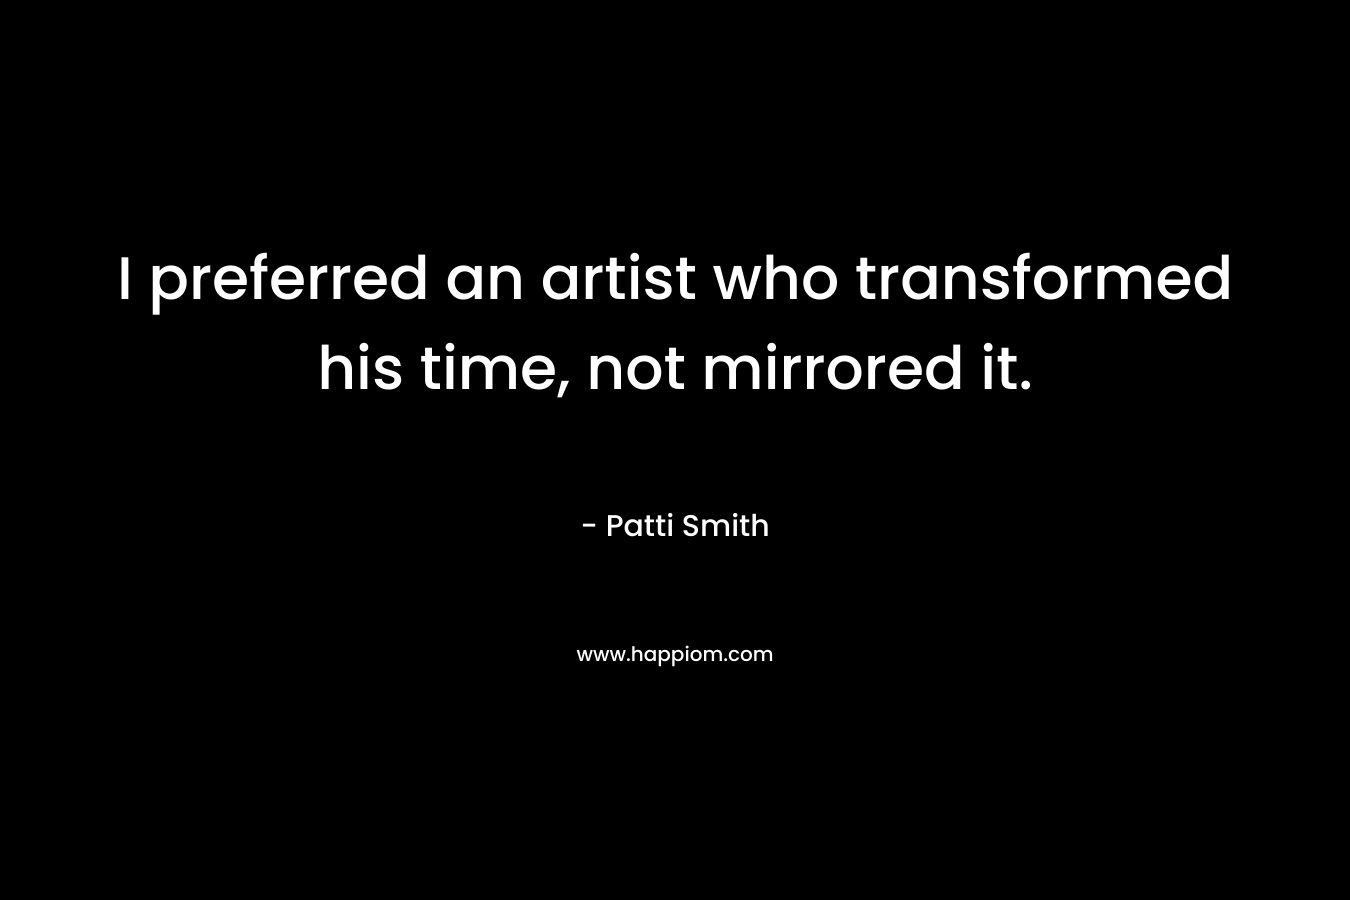 I preferred an artist who transformed his time, not mirrored it. – Patti Smith